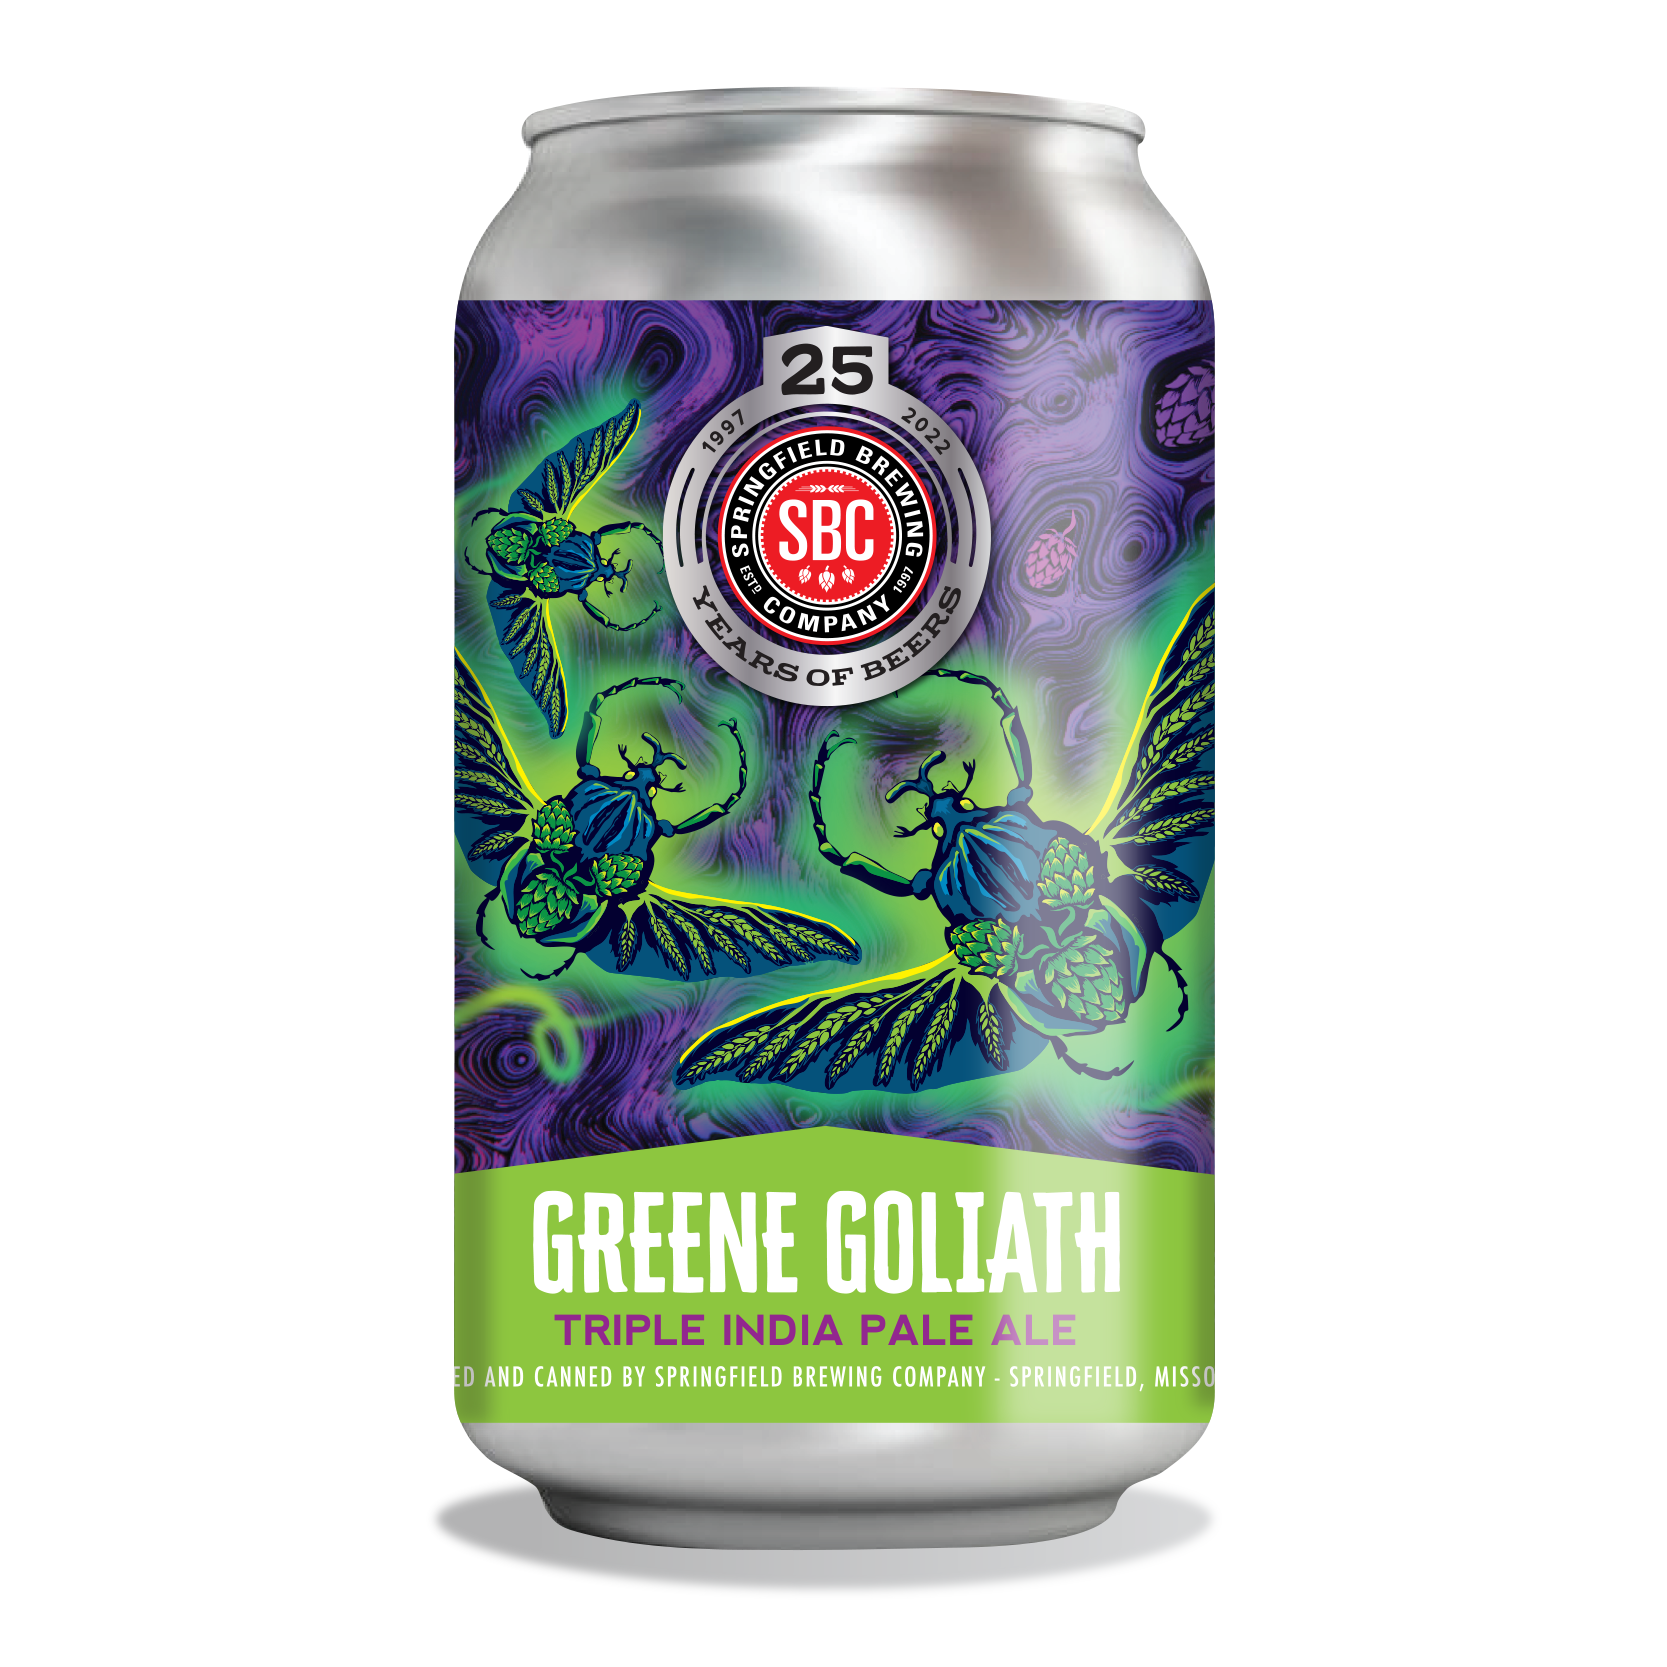 https://brewery.springfieldbrewingco.com/wp-content/uploads/2022/06/25thGreeneGoliath_CanWebsite.png